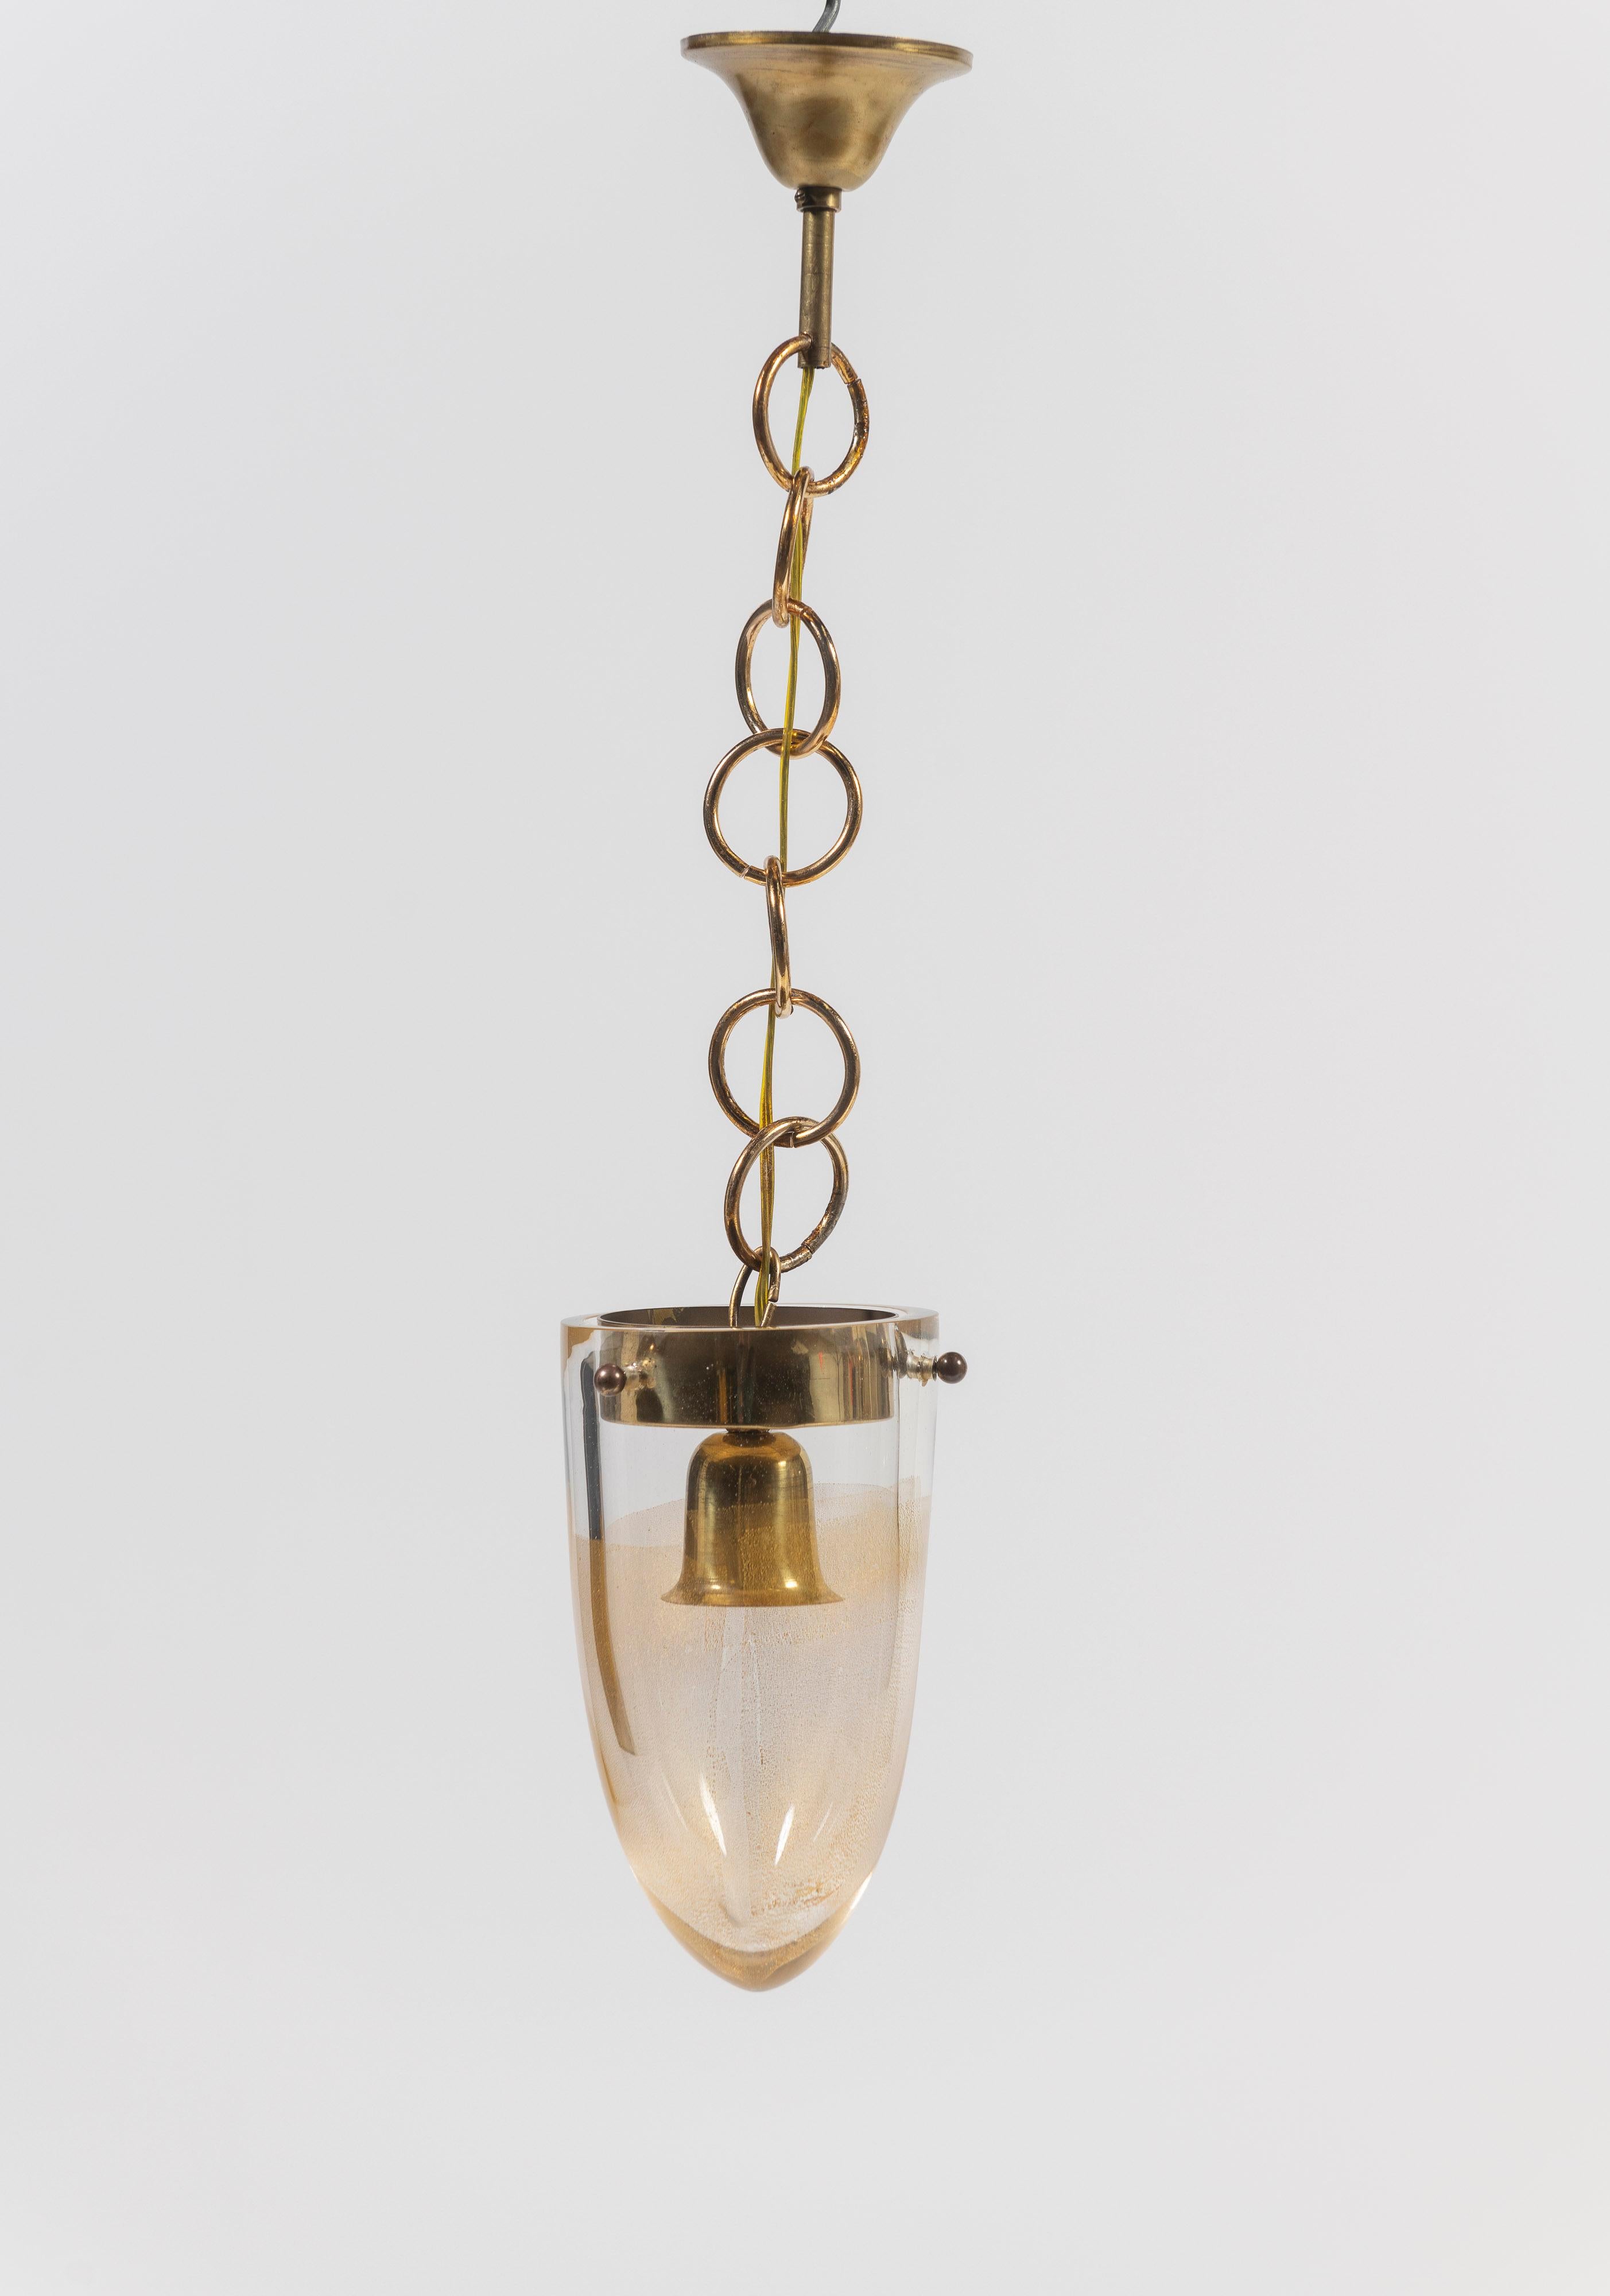 Sold as a set of three, these gorgeous Murano blown glass pendants, with gold dust inclusions, are a great grouping to illuminate the space over a counter, in a hallway, over a table or in the bath. All three pendants hang on 10 inch circular chains